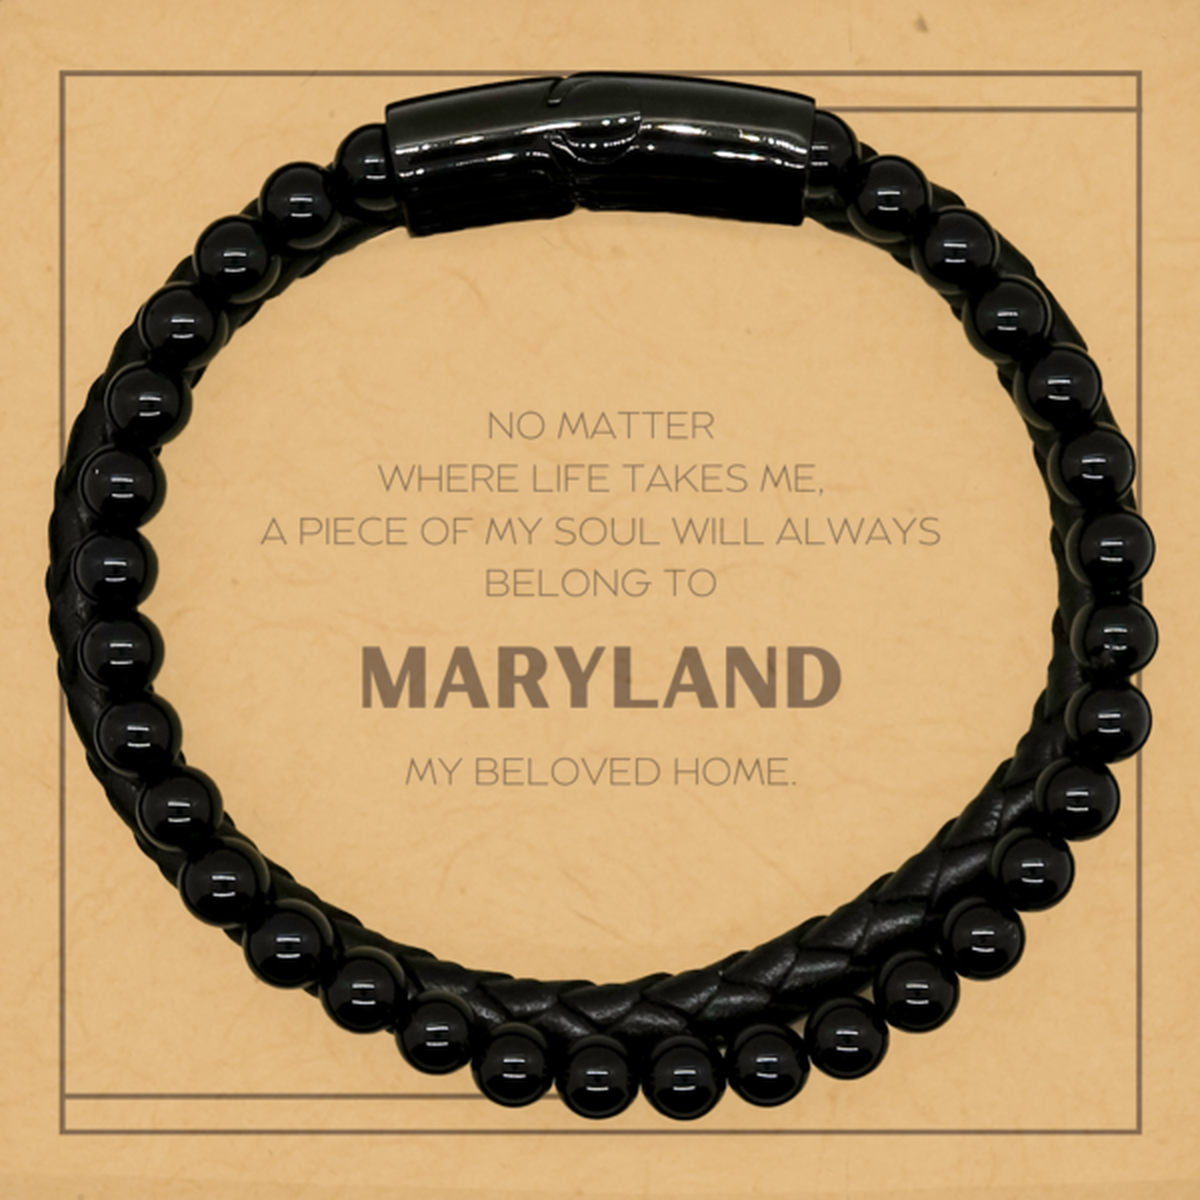 Love Maryland State Gifts, My soul will always belong to Maryland, Proud Stone Leather Bracelets, Birthday Unique Gifts For Maryland Men, Women, Friends